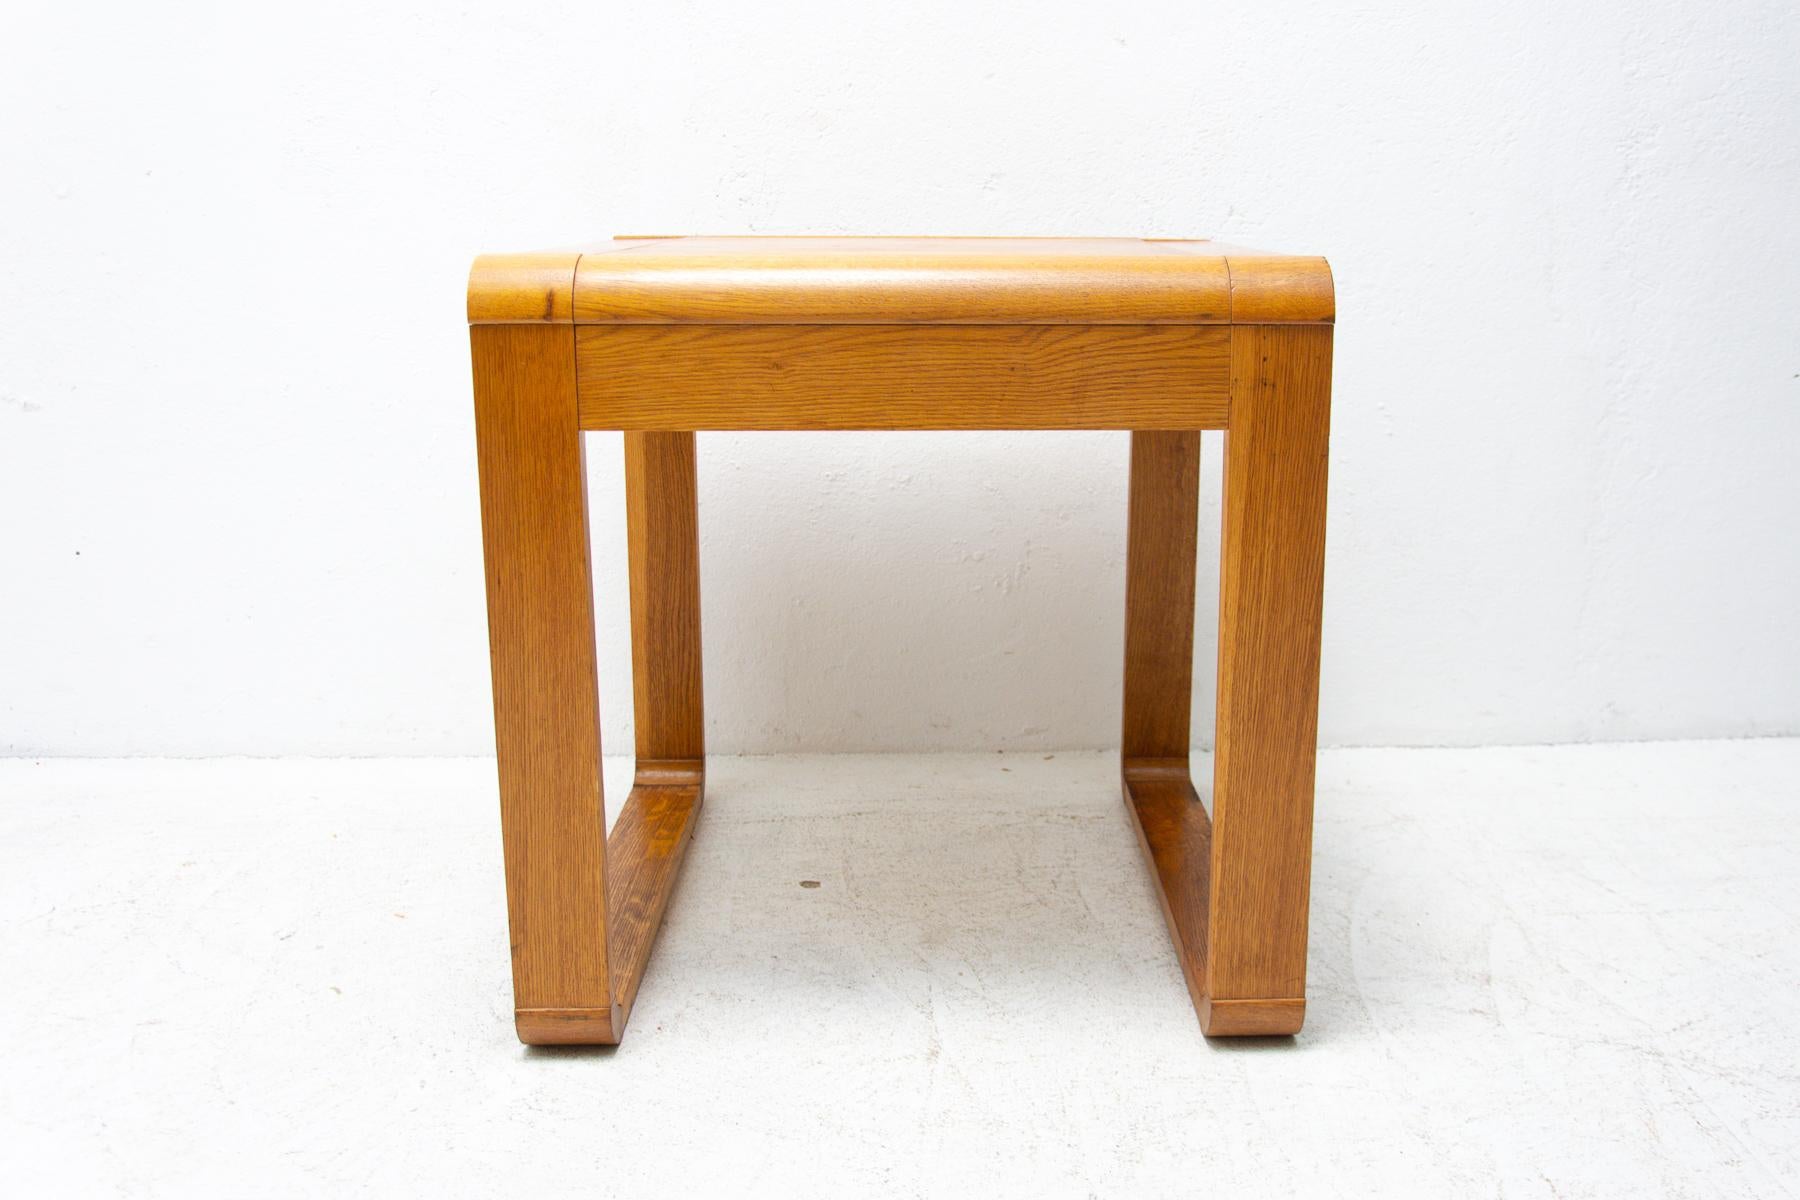 This coffee table was made in the 1970s in the former Czechoslovakia. The table is made of beech wood. It is in original preserved condition without damage, shows signs of age and use.